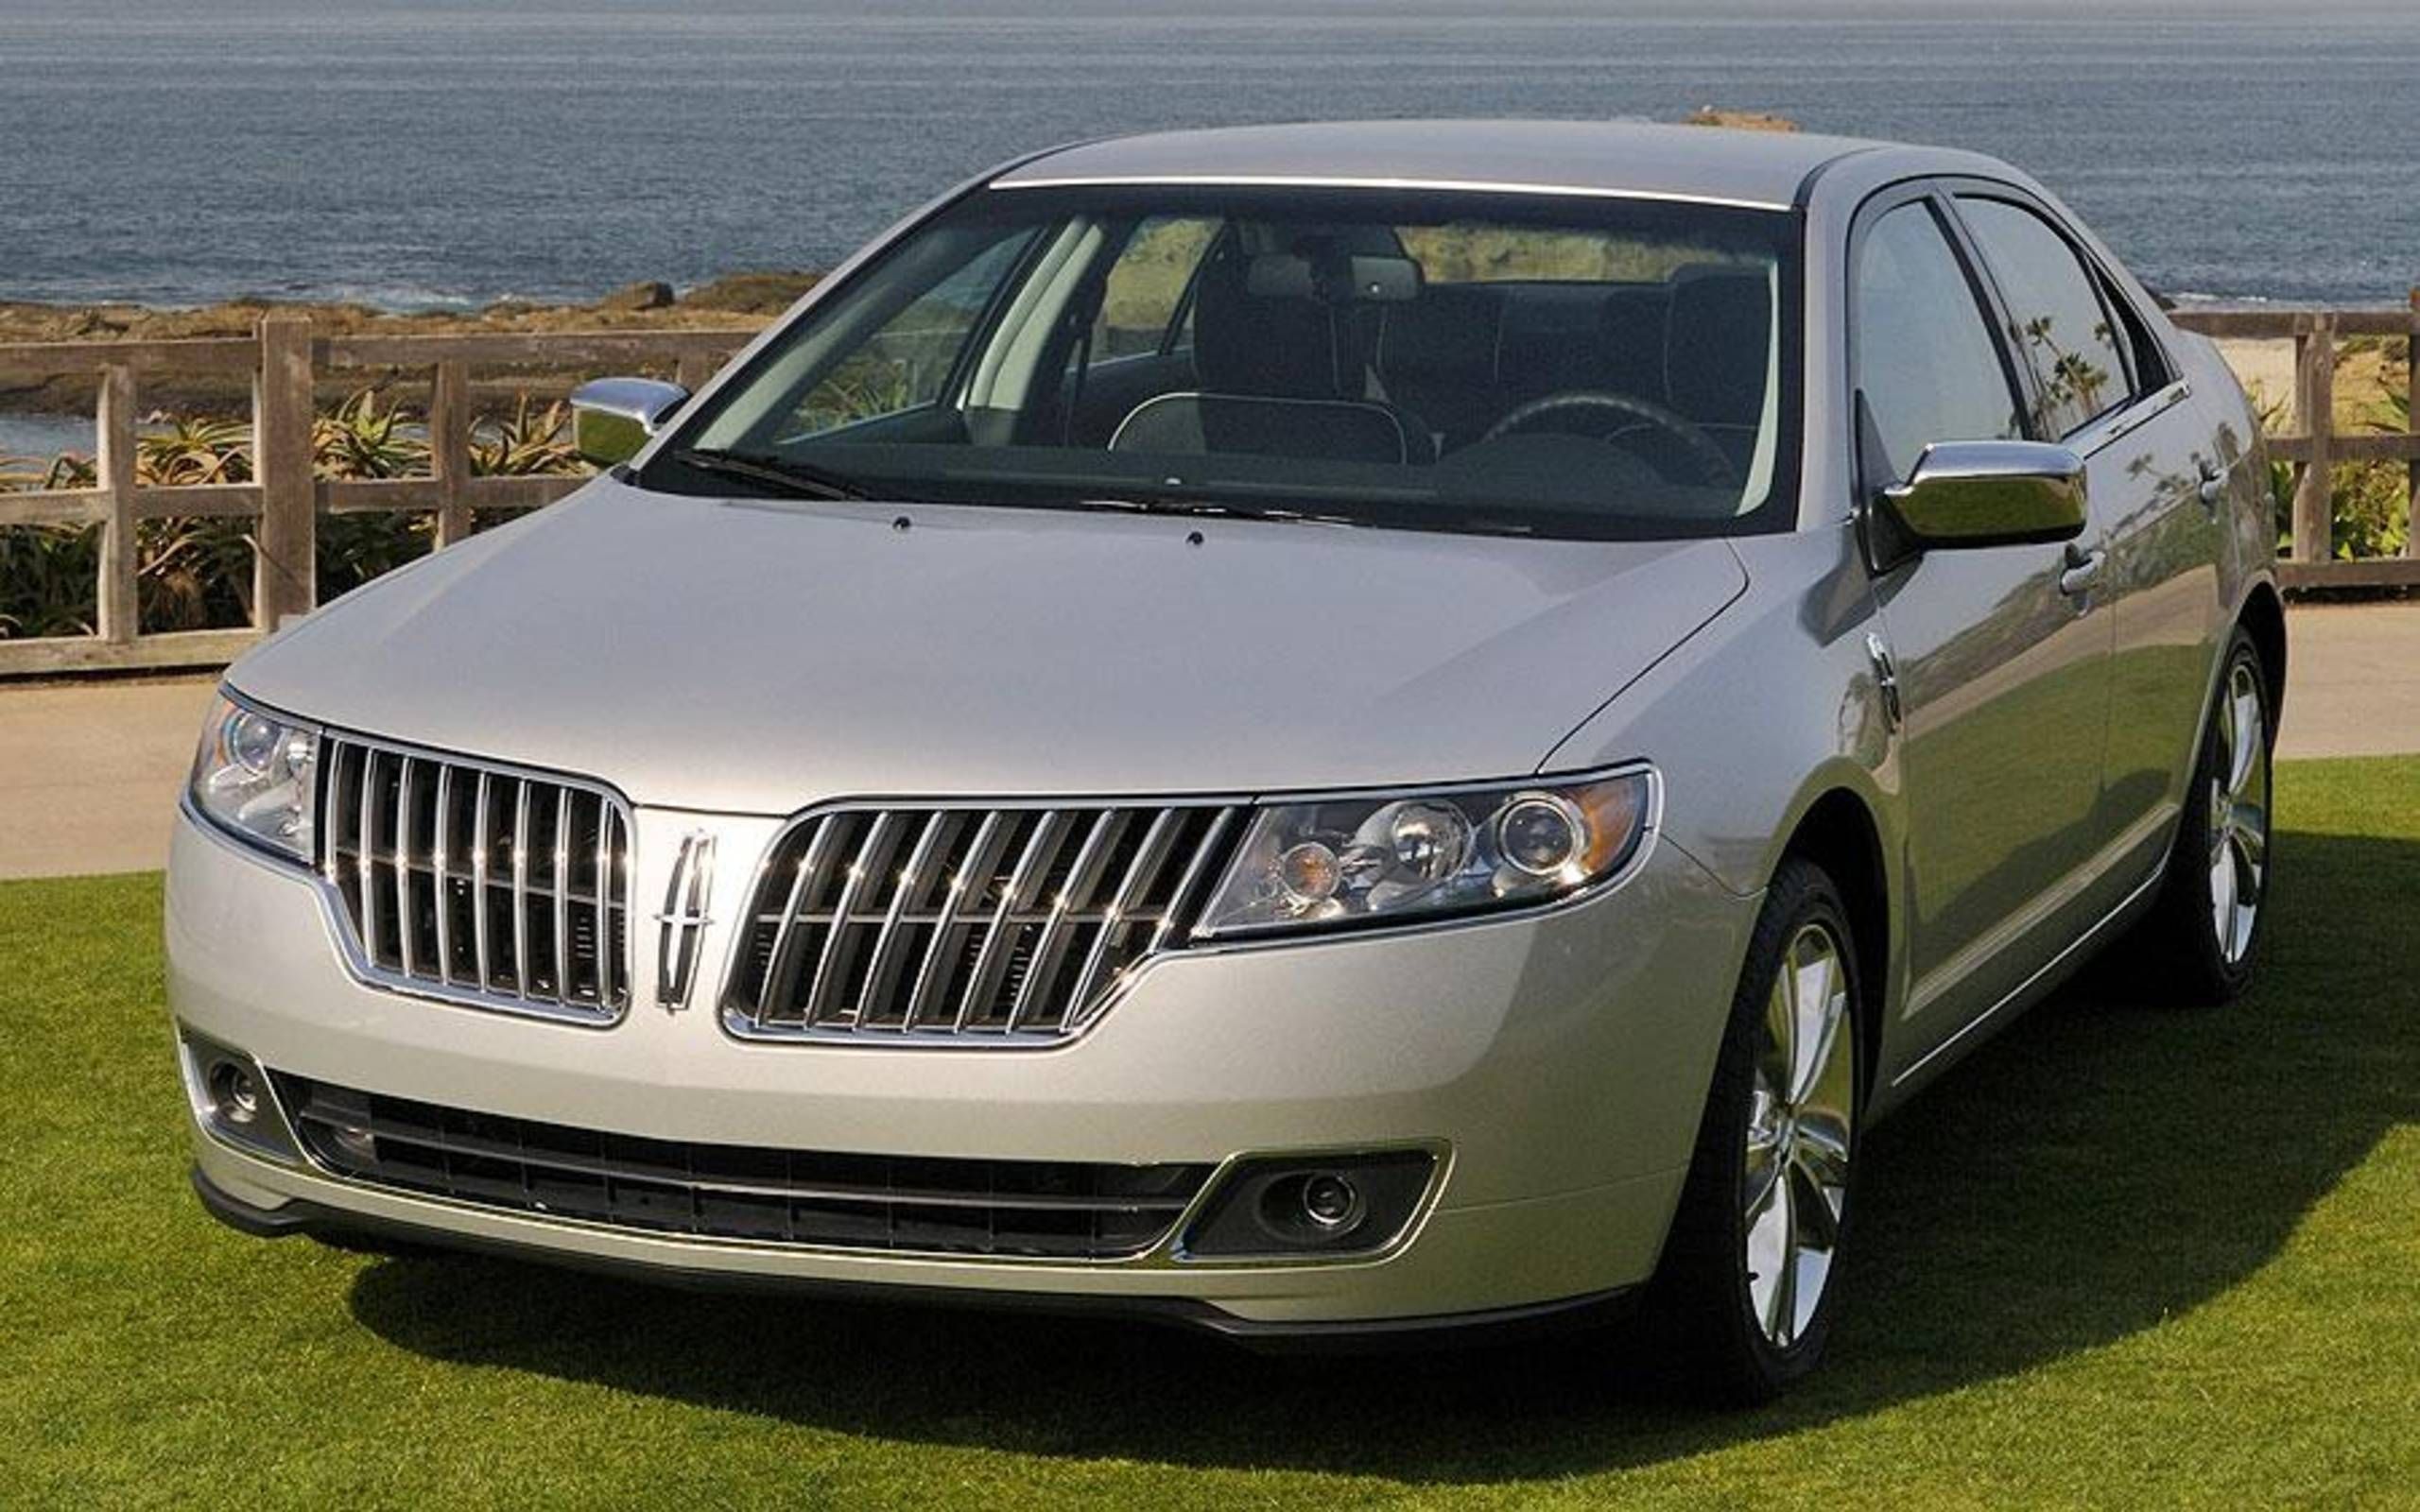 2010 Lincoln MKZ is quicker, quieter and quasi-cool